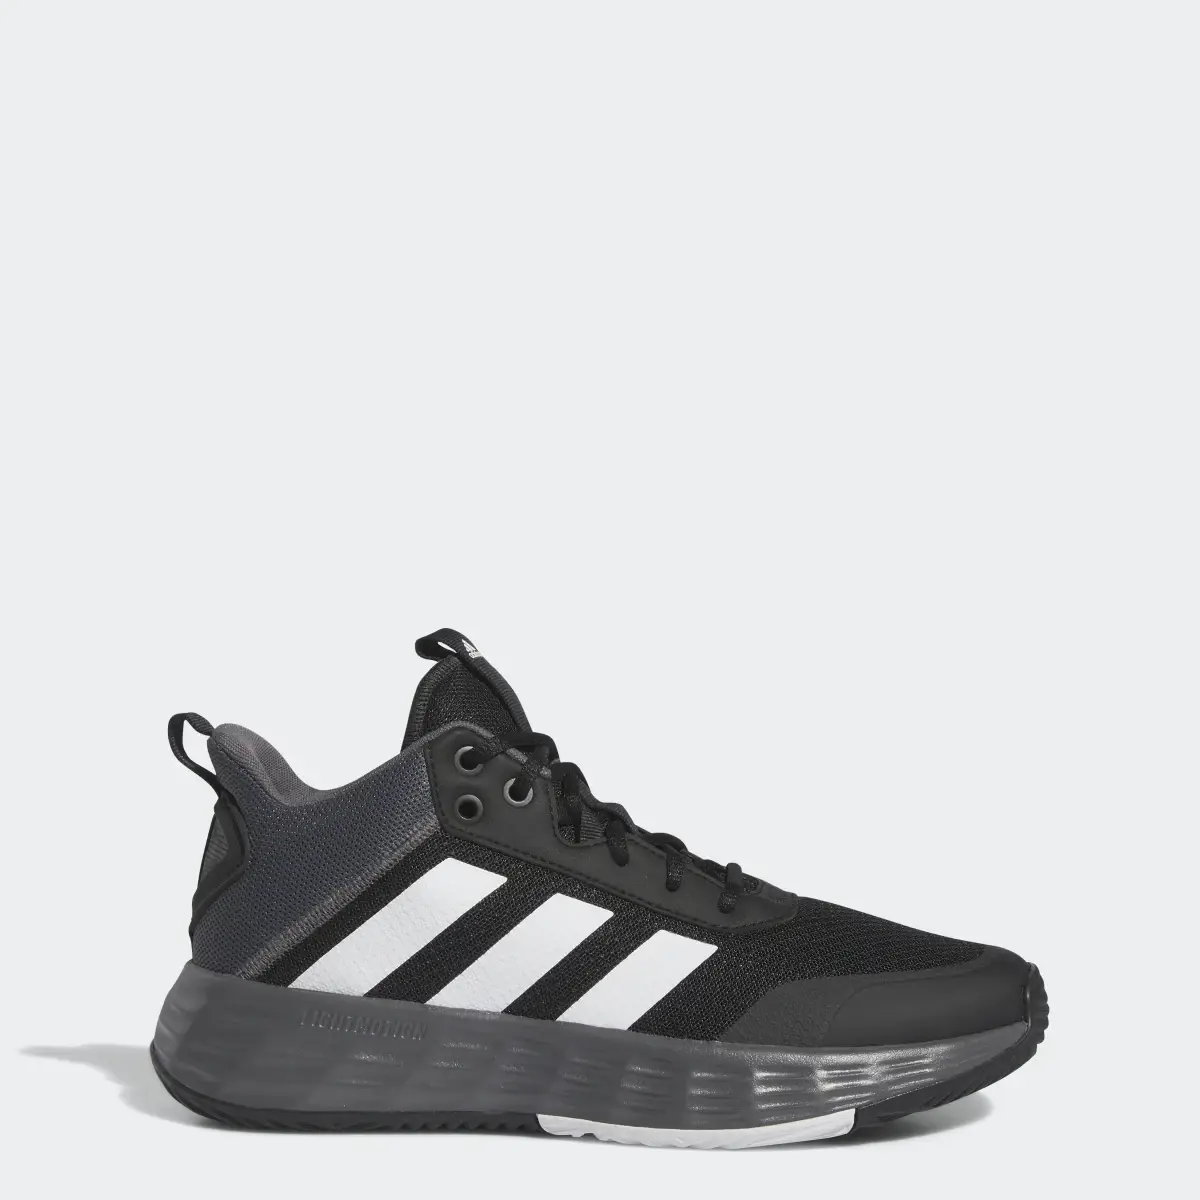 Adidas Ownthegame Basketball Shoes. 1